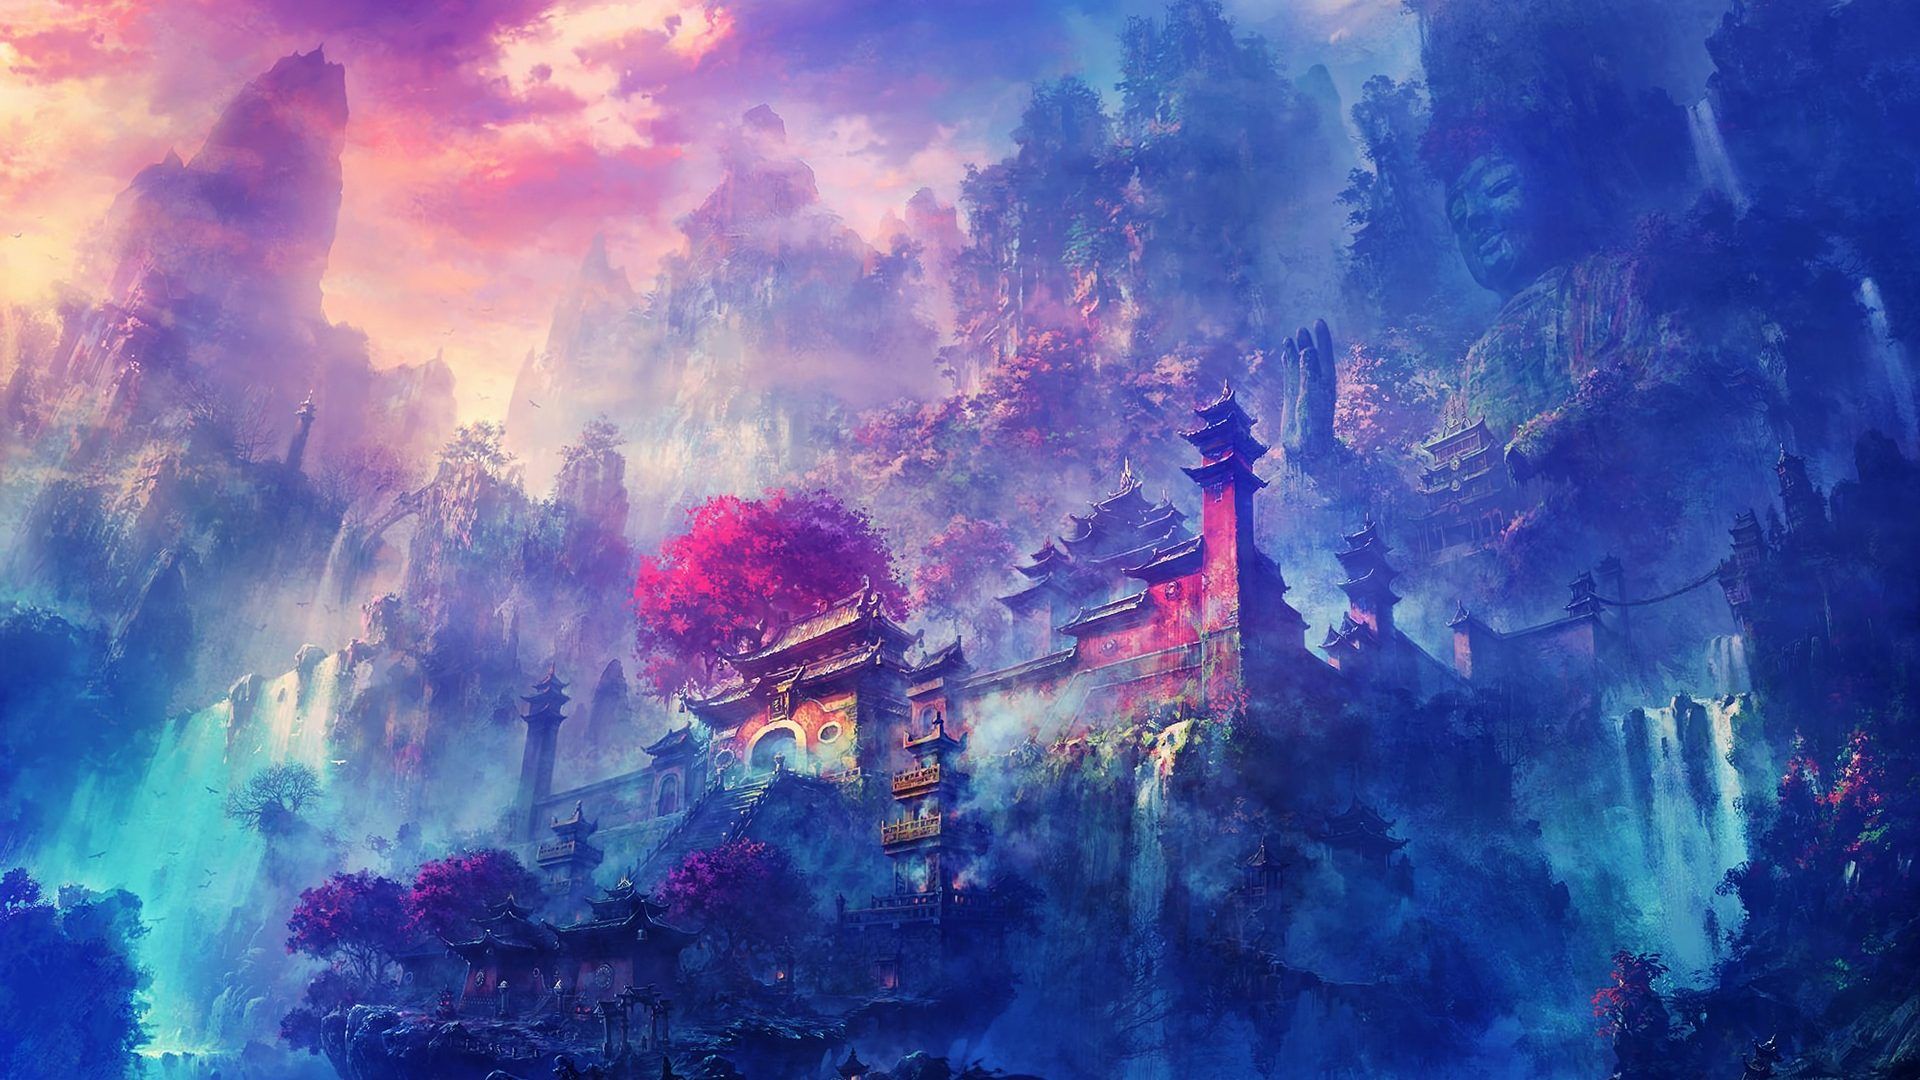 Free Dark Anime Scenery Wallpaper High Quality Resolution at Cool